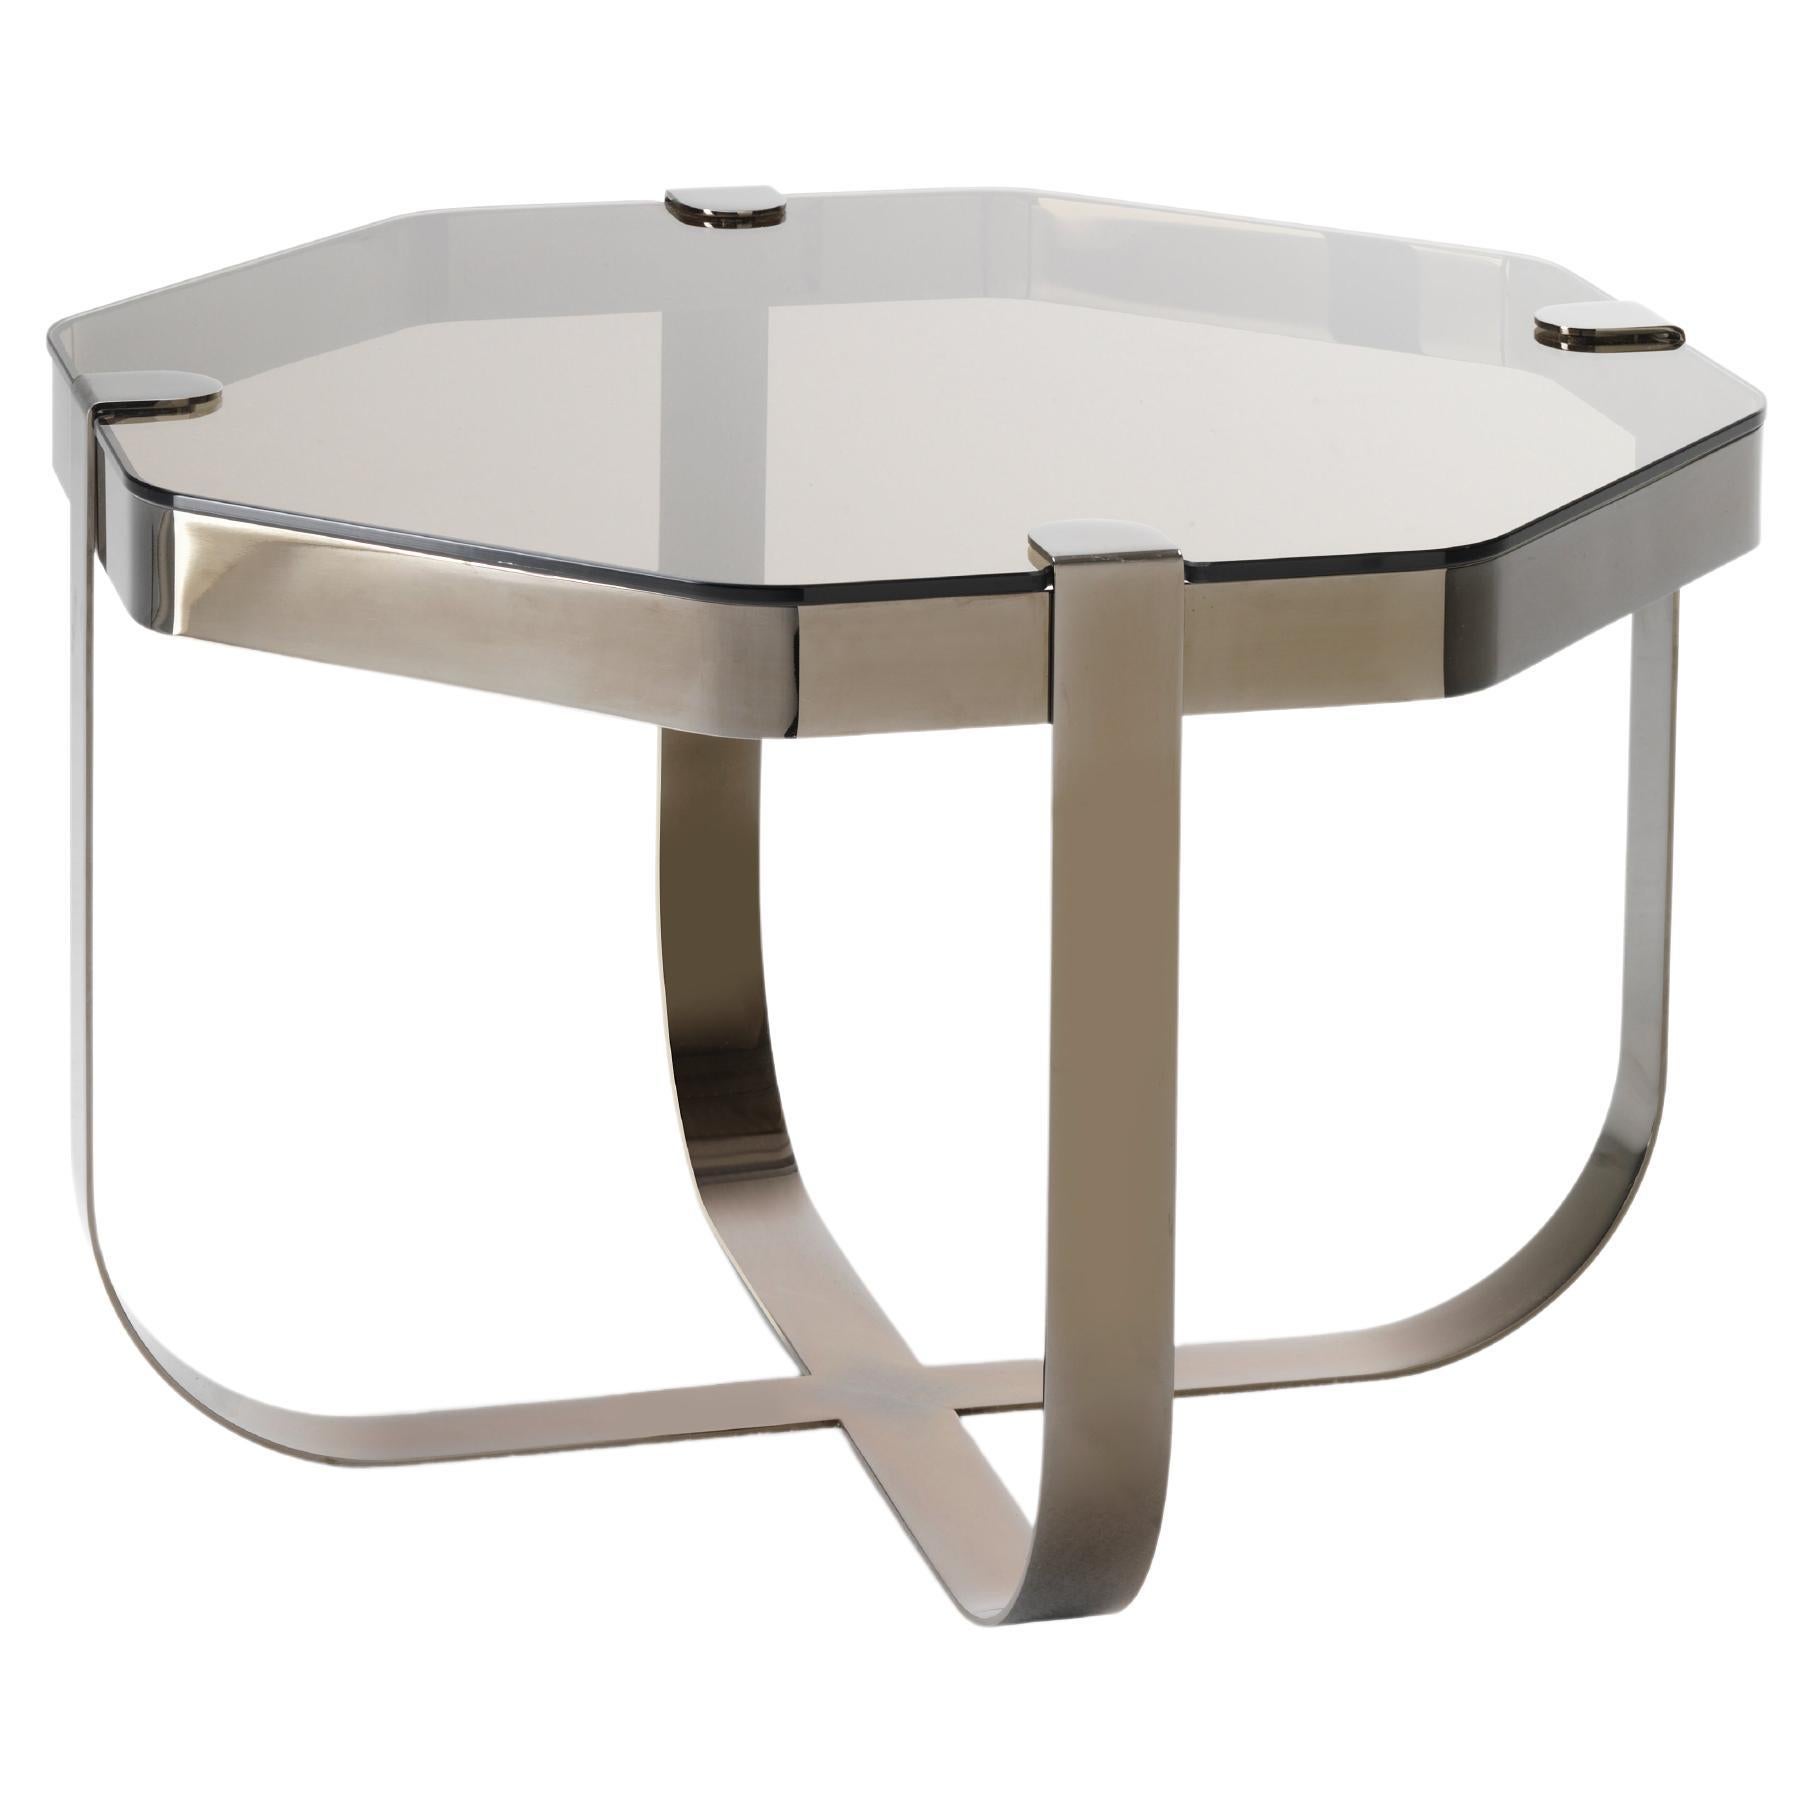 Ring Octagonal Coffee Table in Nickel Frame & Bronze Top by Serena Confalonieri For Sale